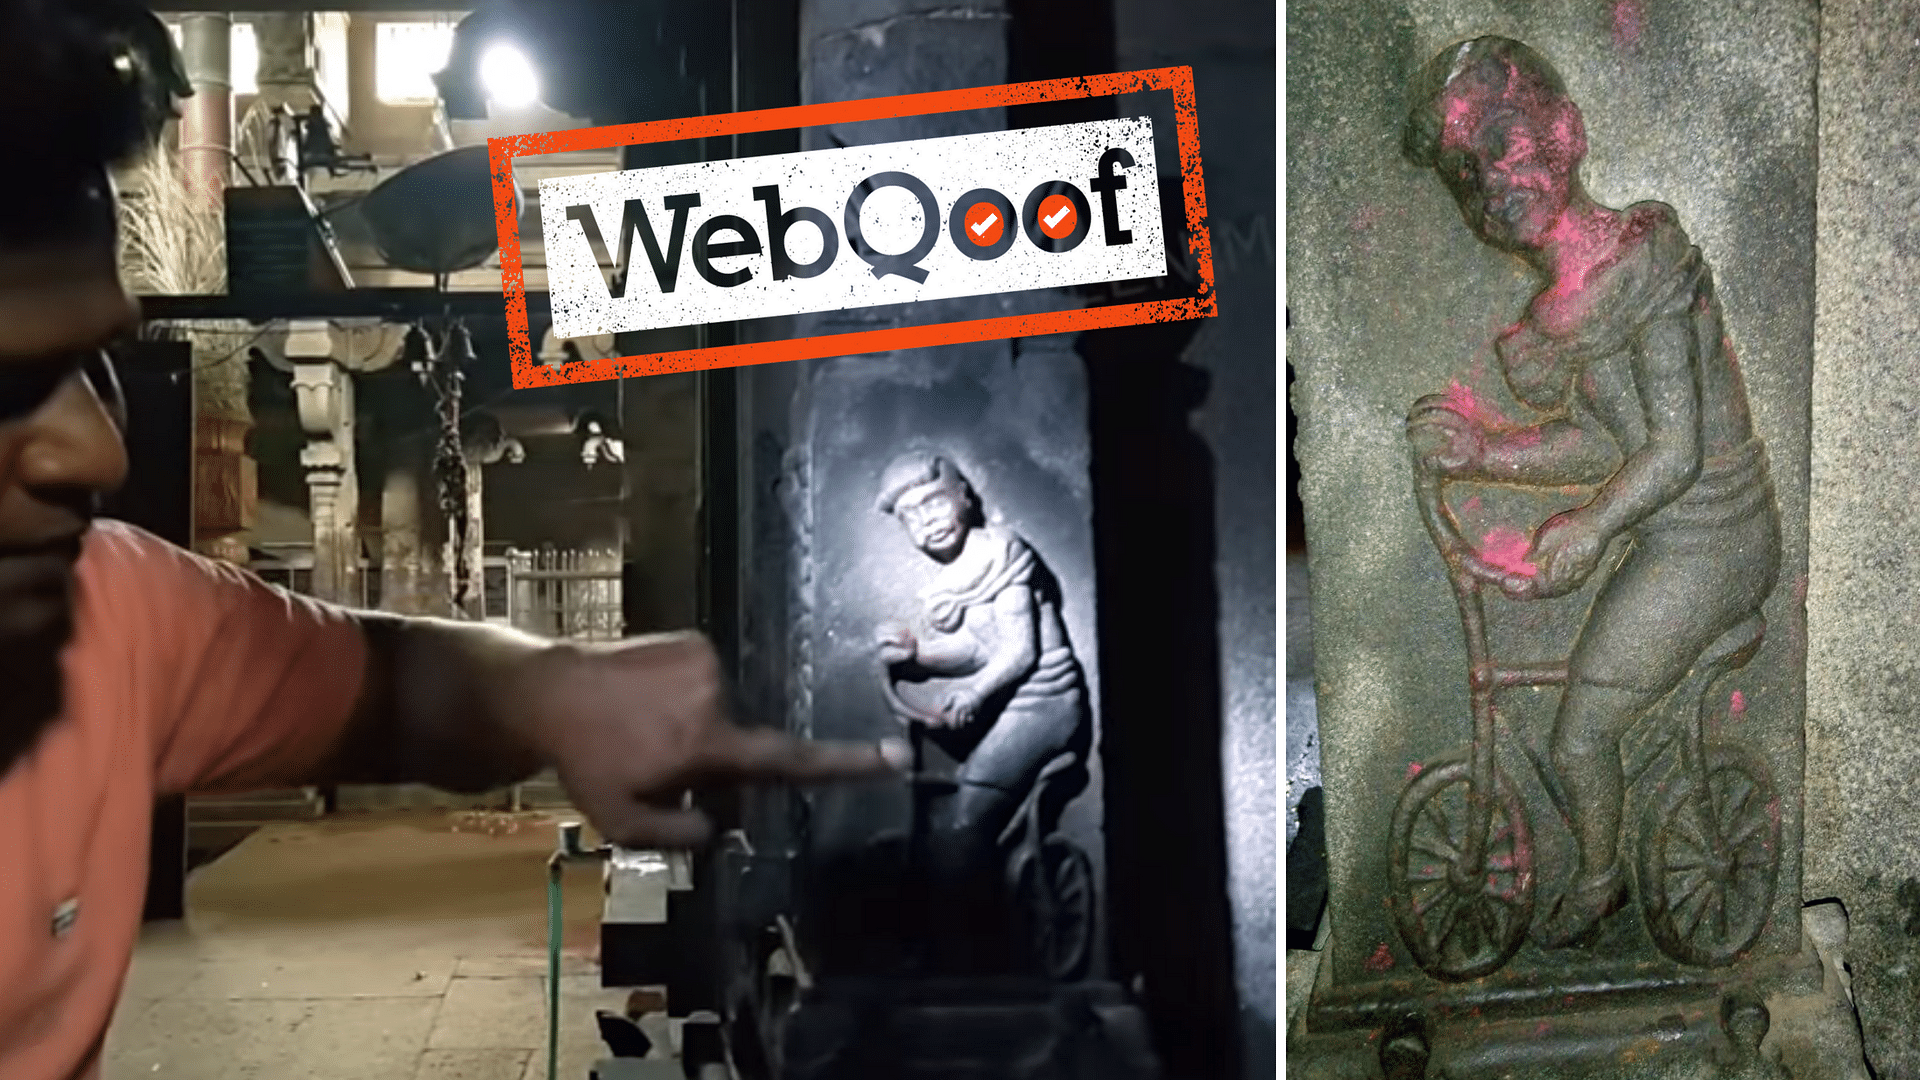 The carving was found at the Panchavarna Swamy temple in Tamil Nadu’s Woraiyur.